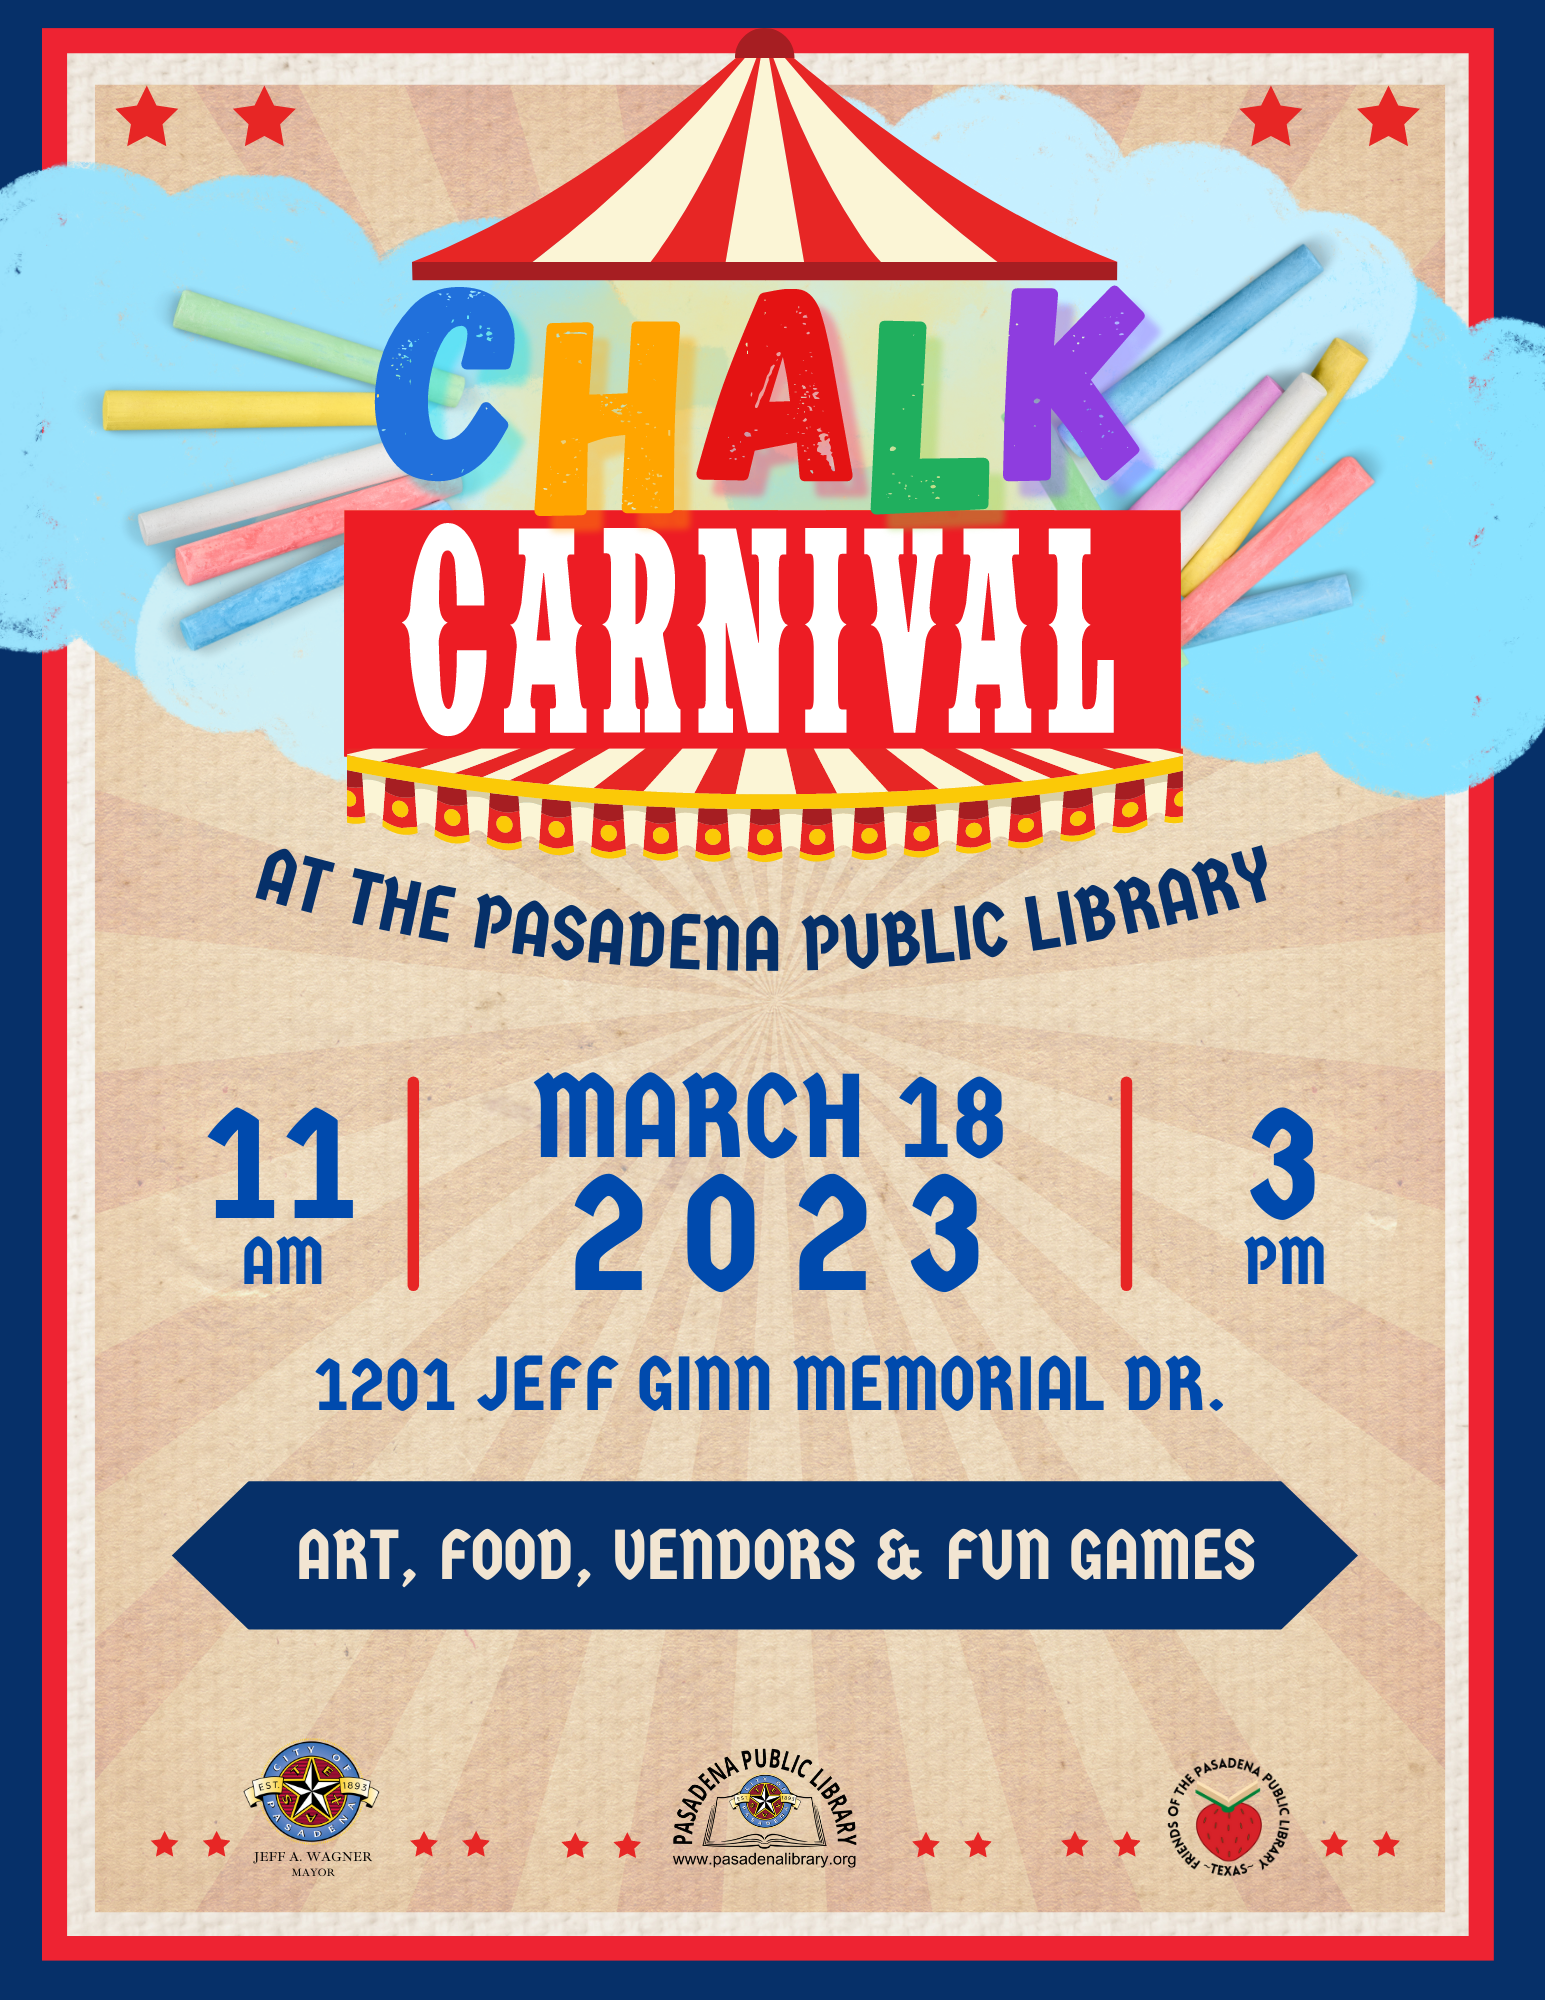 Our annual carnival is just around the corner and this year we're taking it outside! We're kicking off the Spring season with our first-ever Chalk Carnival with art being created in the front parking lot of Central Library.